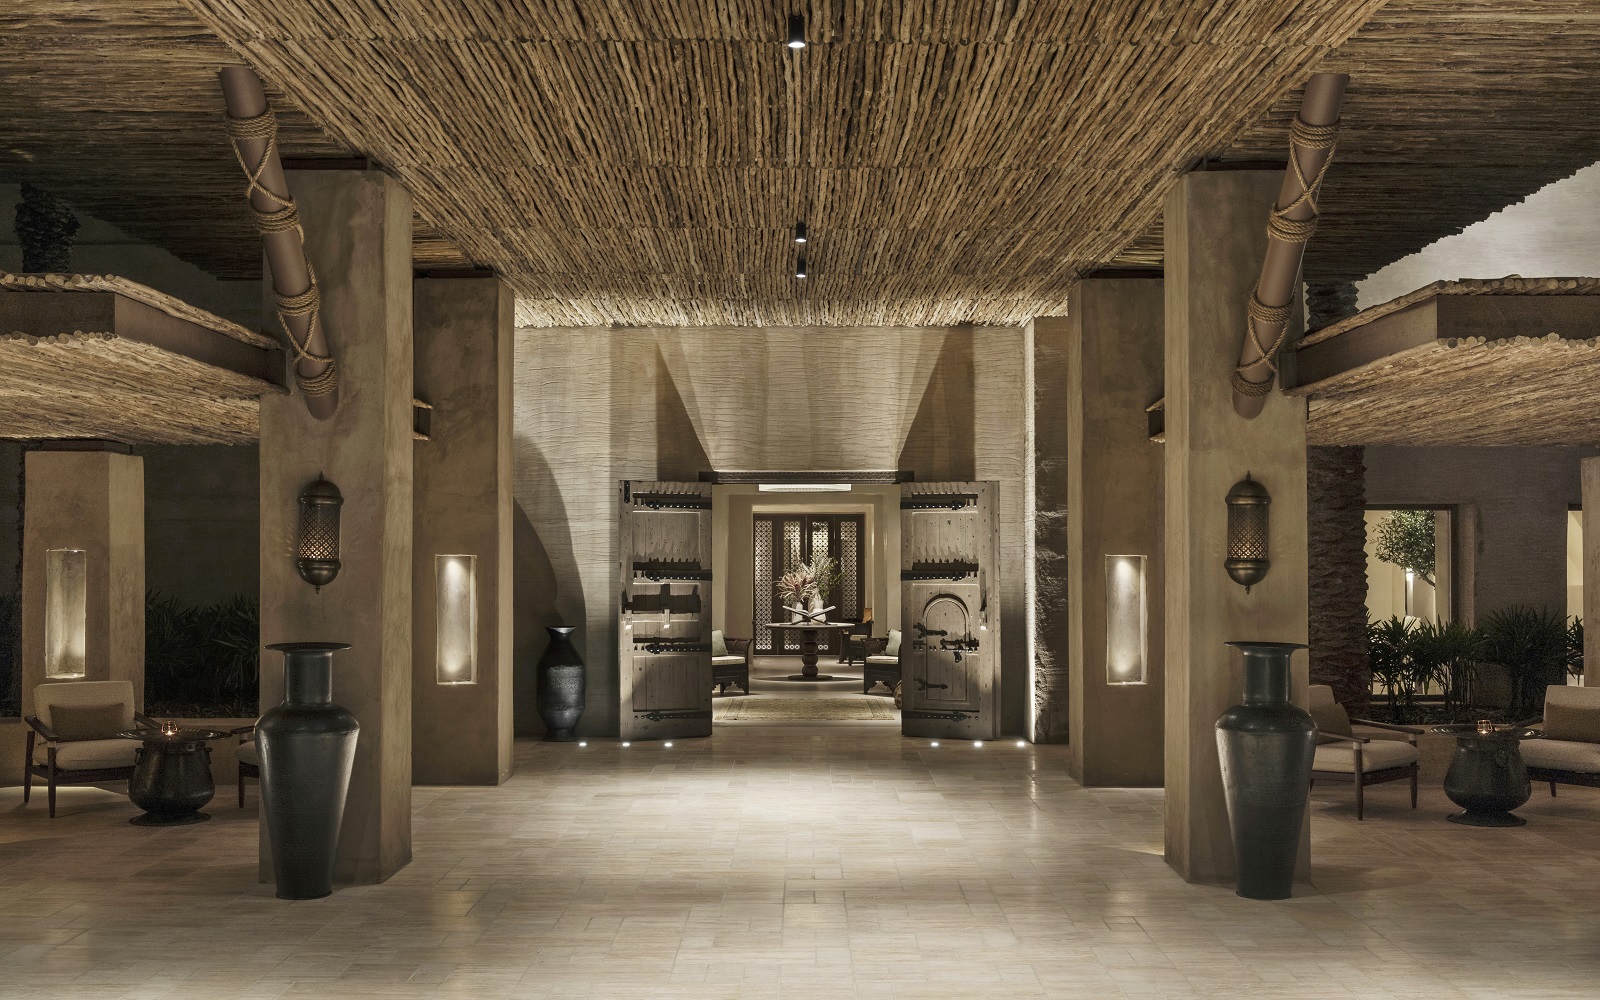 wood and stone colours in dramatic pillared hotel entrance at Bab Al shams